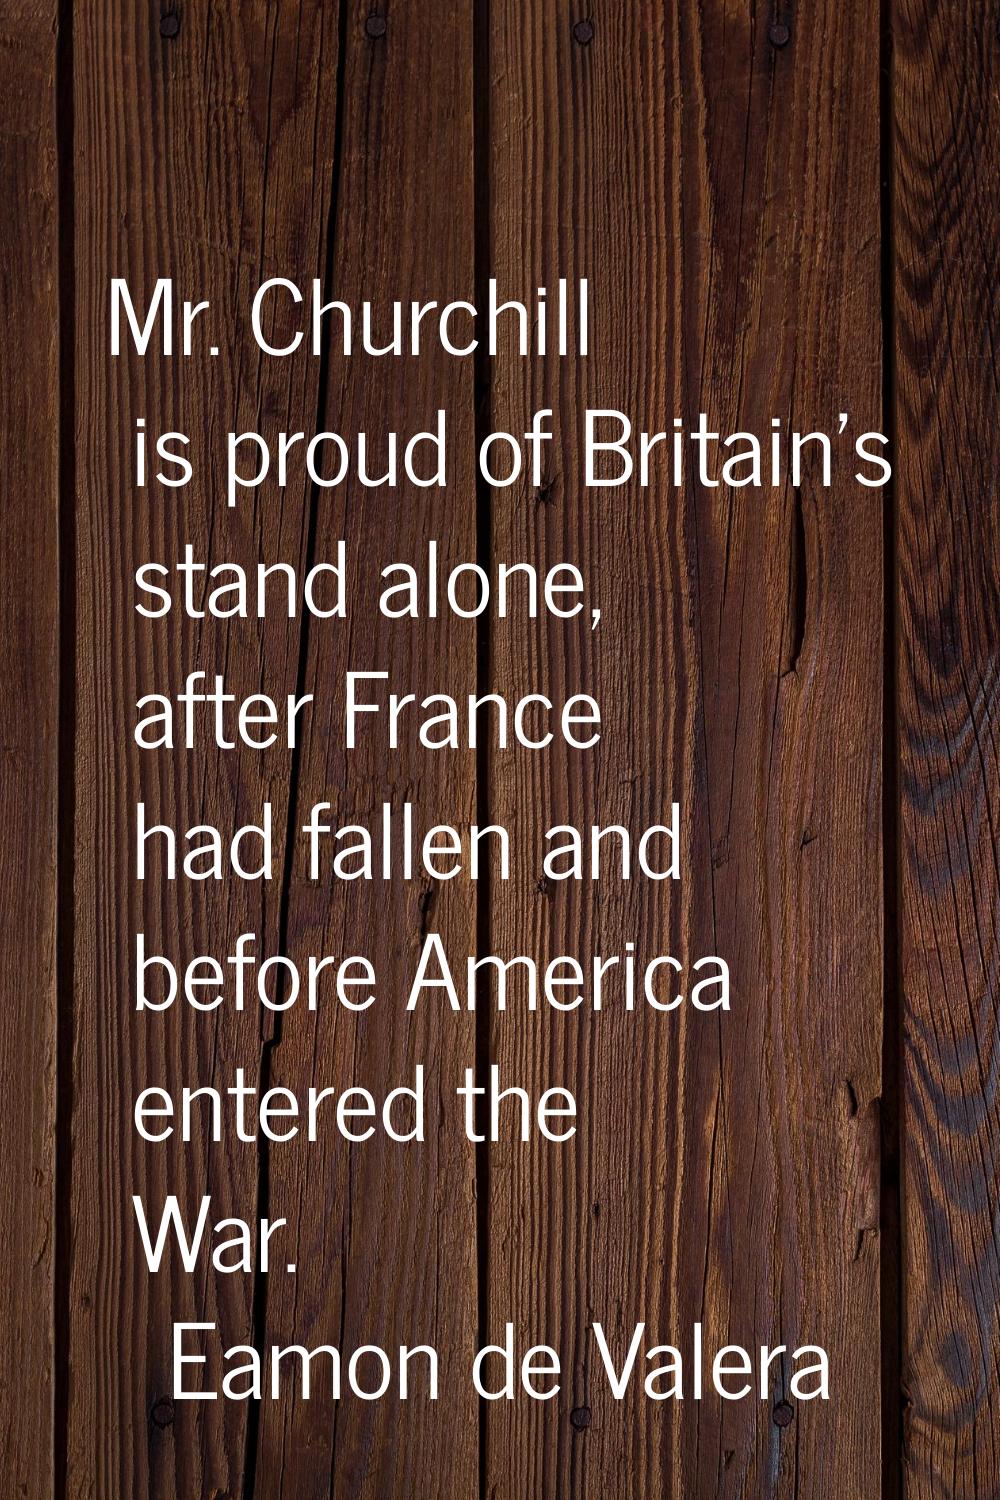 Mr. Churchill is proud of Britain's stand alone, after France had fallen and before America entered